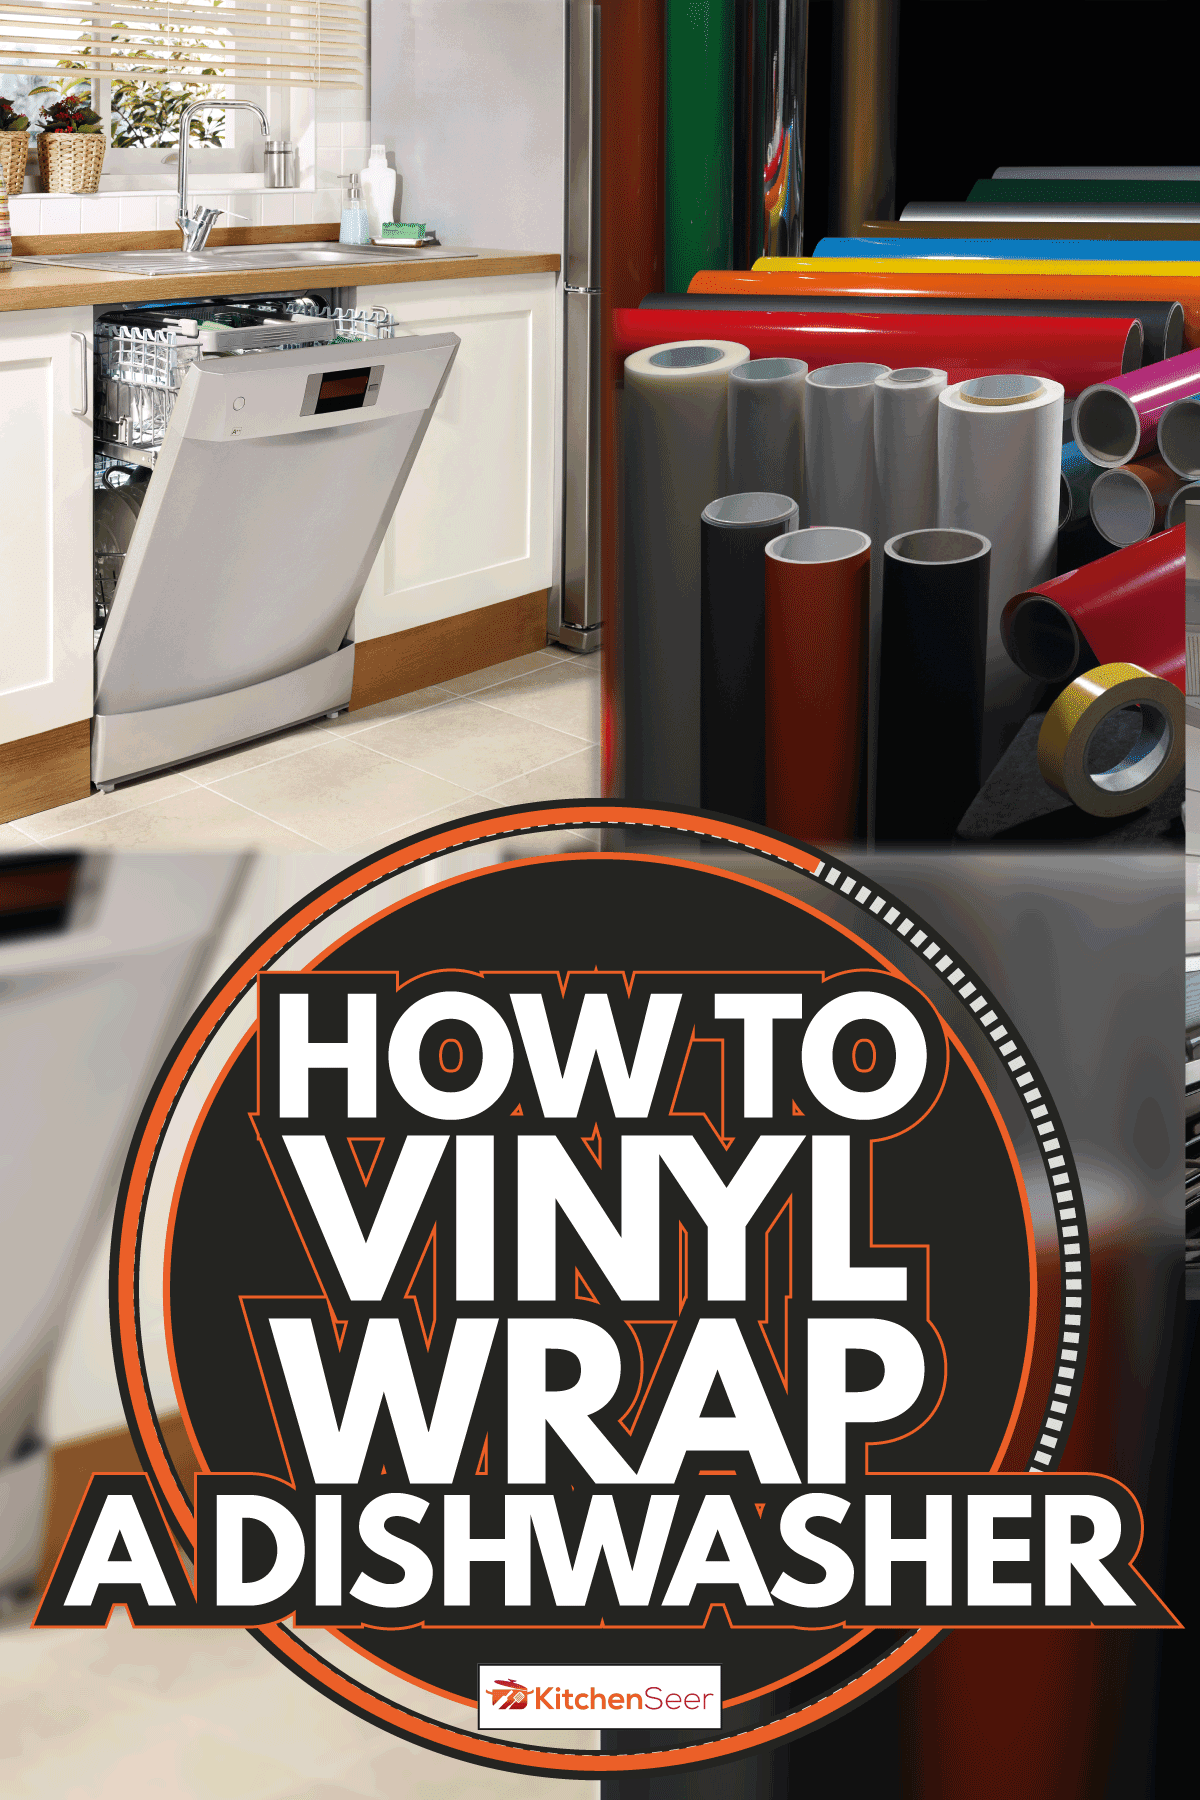 metal doored dishwasher in domestic kitchen and vinyl wraps. How To Vinyl Wrap A Dishwasher